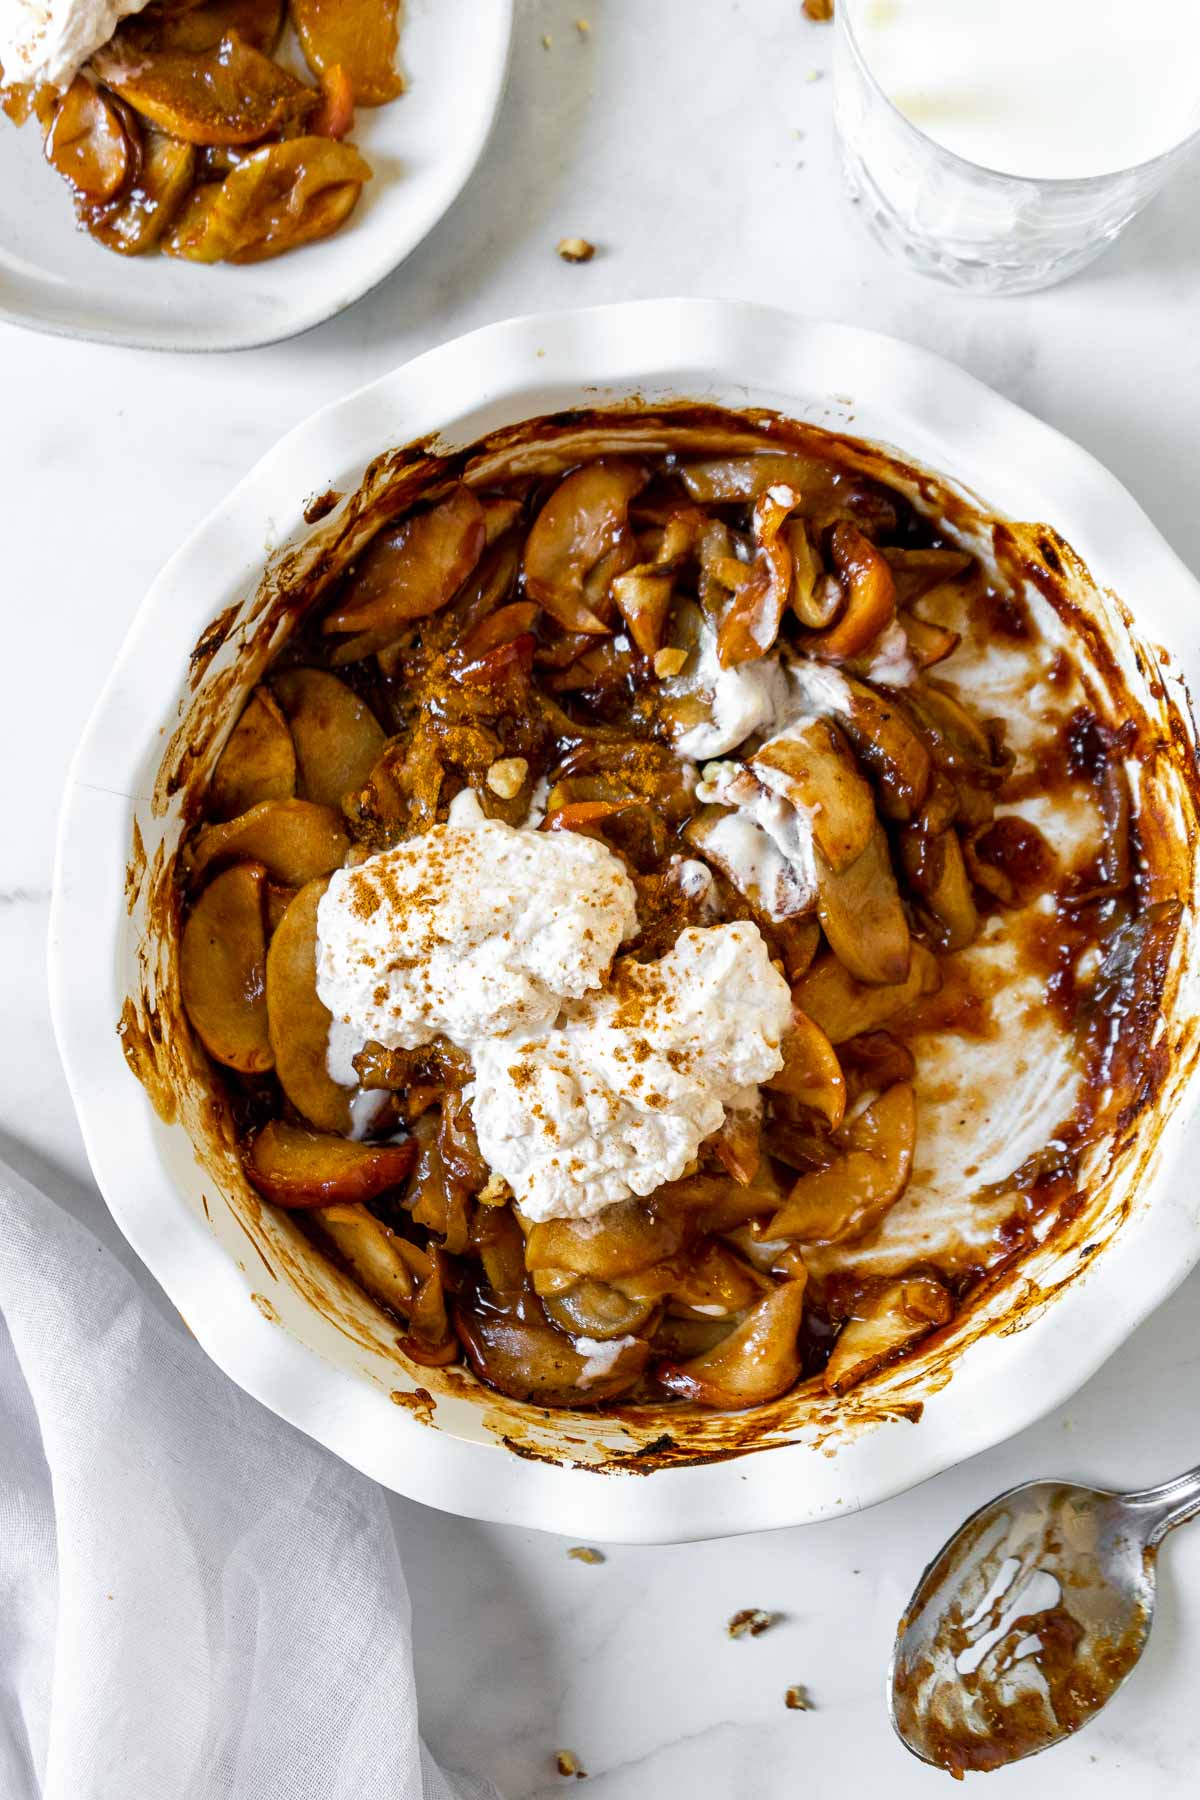 Air fryer baked apples in a pie pan with whipped cream, some of the apples are served onto another plate.